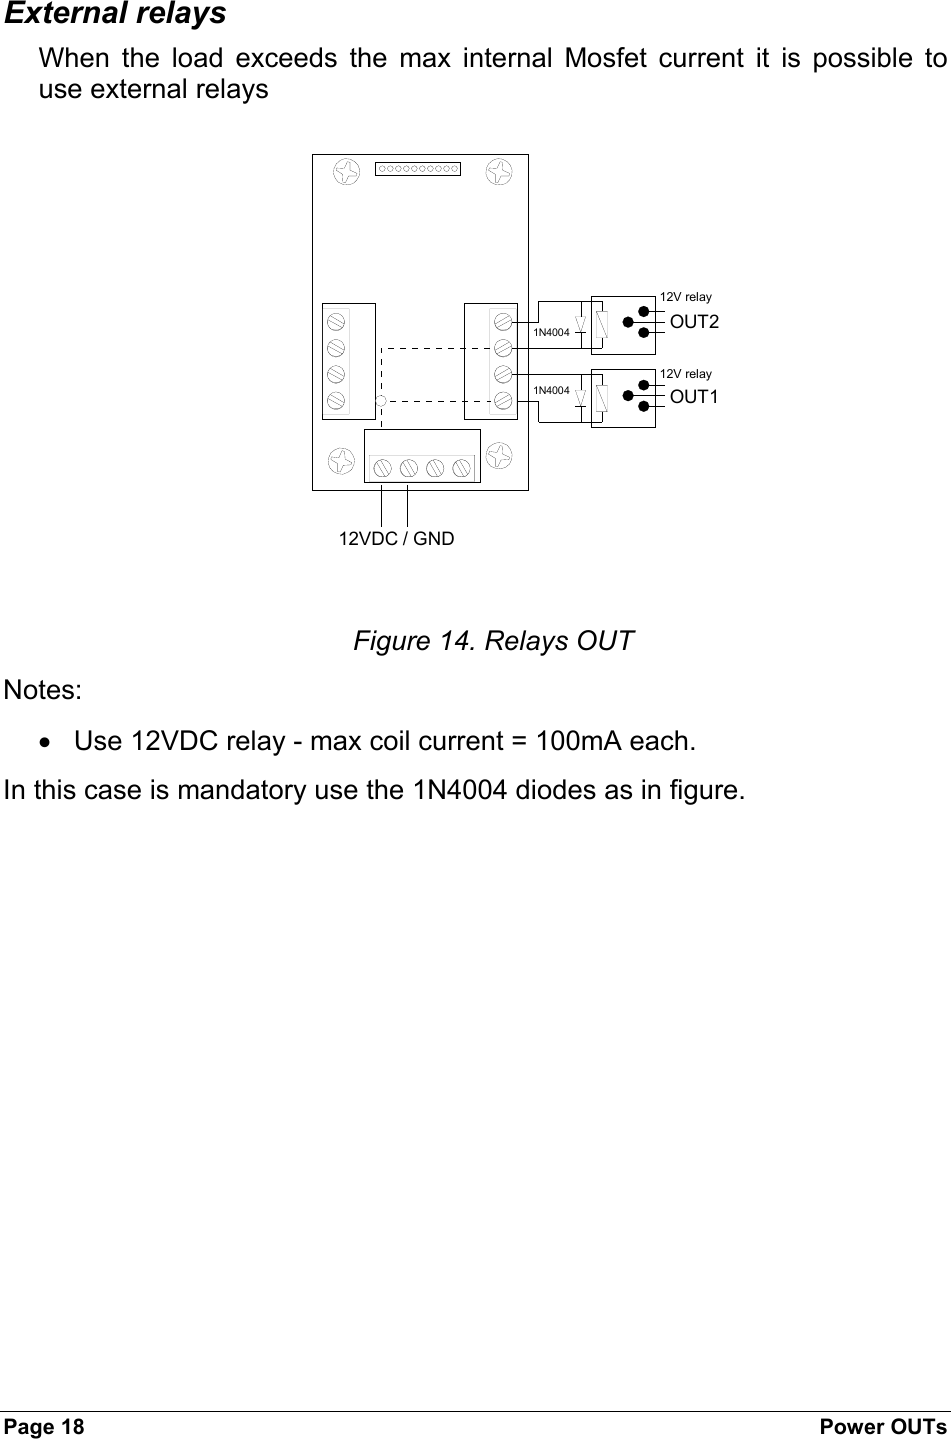 Page 18  Power OUTs External relays When the load exceeds the max internal Mosfet current it is possible to use external relays  12VDC / GNDOUT1OUT212V relay12V relay1N40041N4004 Figure 14. Relays OUT Notes:  •  Use 12VDC relay - max coil current = 100mA each.  In this case is mandatory use the 1N4004 diodes as in figure. 